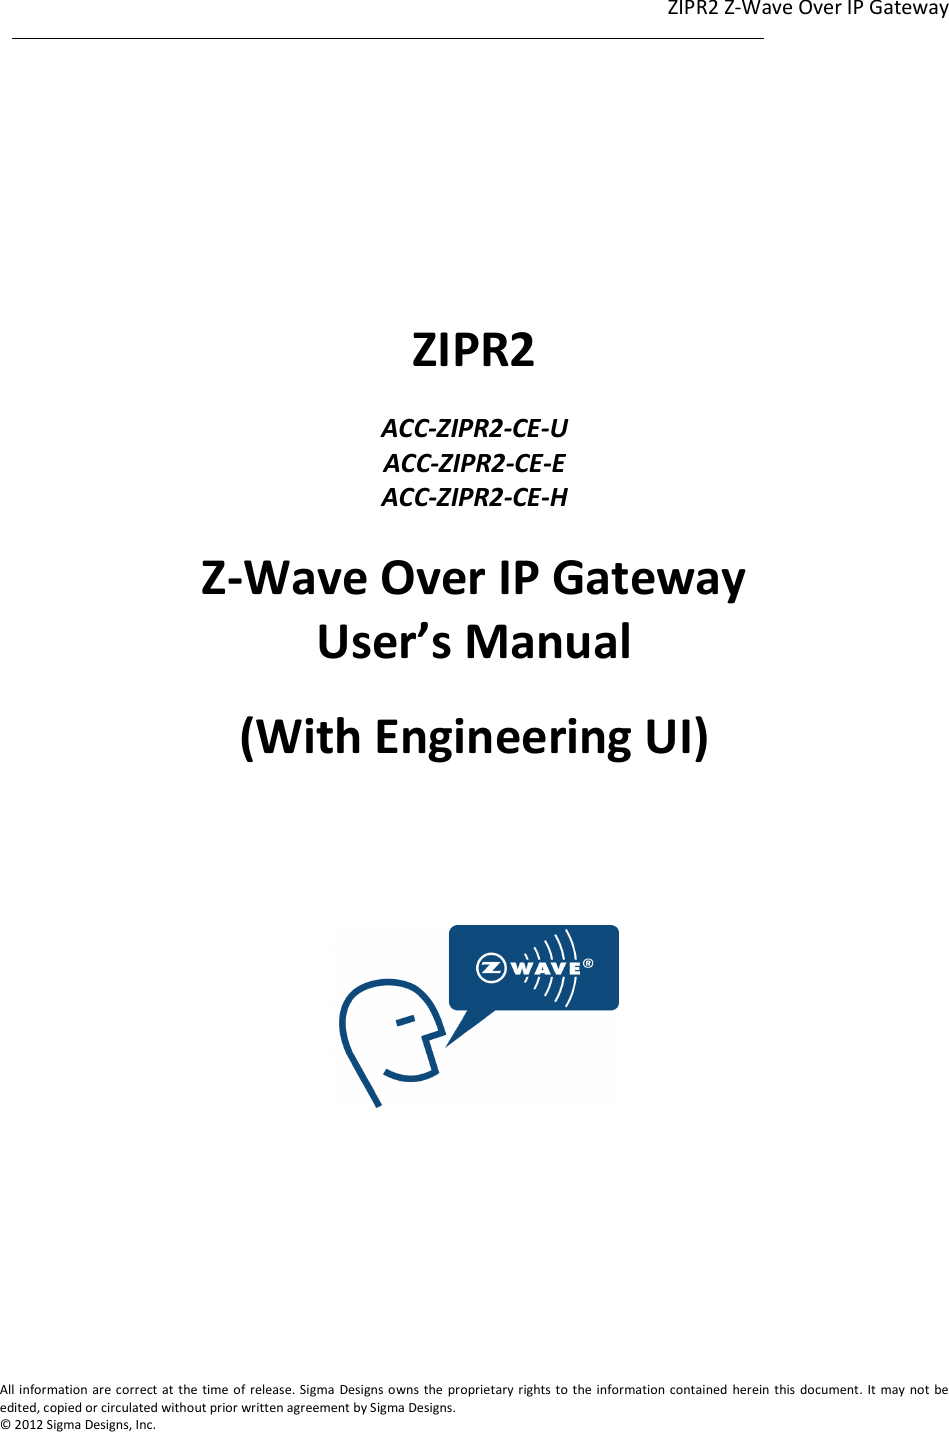 ZIPR2 Z-Wave Over IP Gateway  1                                                                                                                                                                                                             1             All information are correct at the time of release. Sigma  Designs owns  the proprietary rights to the information contained herein this document. It  may not  be edited, copied or circulated without prior written agreement by Sigma Designs.   © 2012 Sigma Designs, Inc.       ZIPR2  ACC-ZIPR2-CE-U ACC-ZIPR2-CE-E ACC-ZIPR2-CE-H  Z-Wave Over IP Gateway User’s Manual (With Engineering UI)       